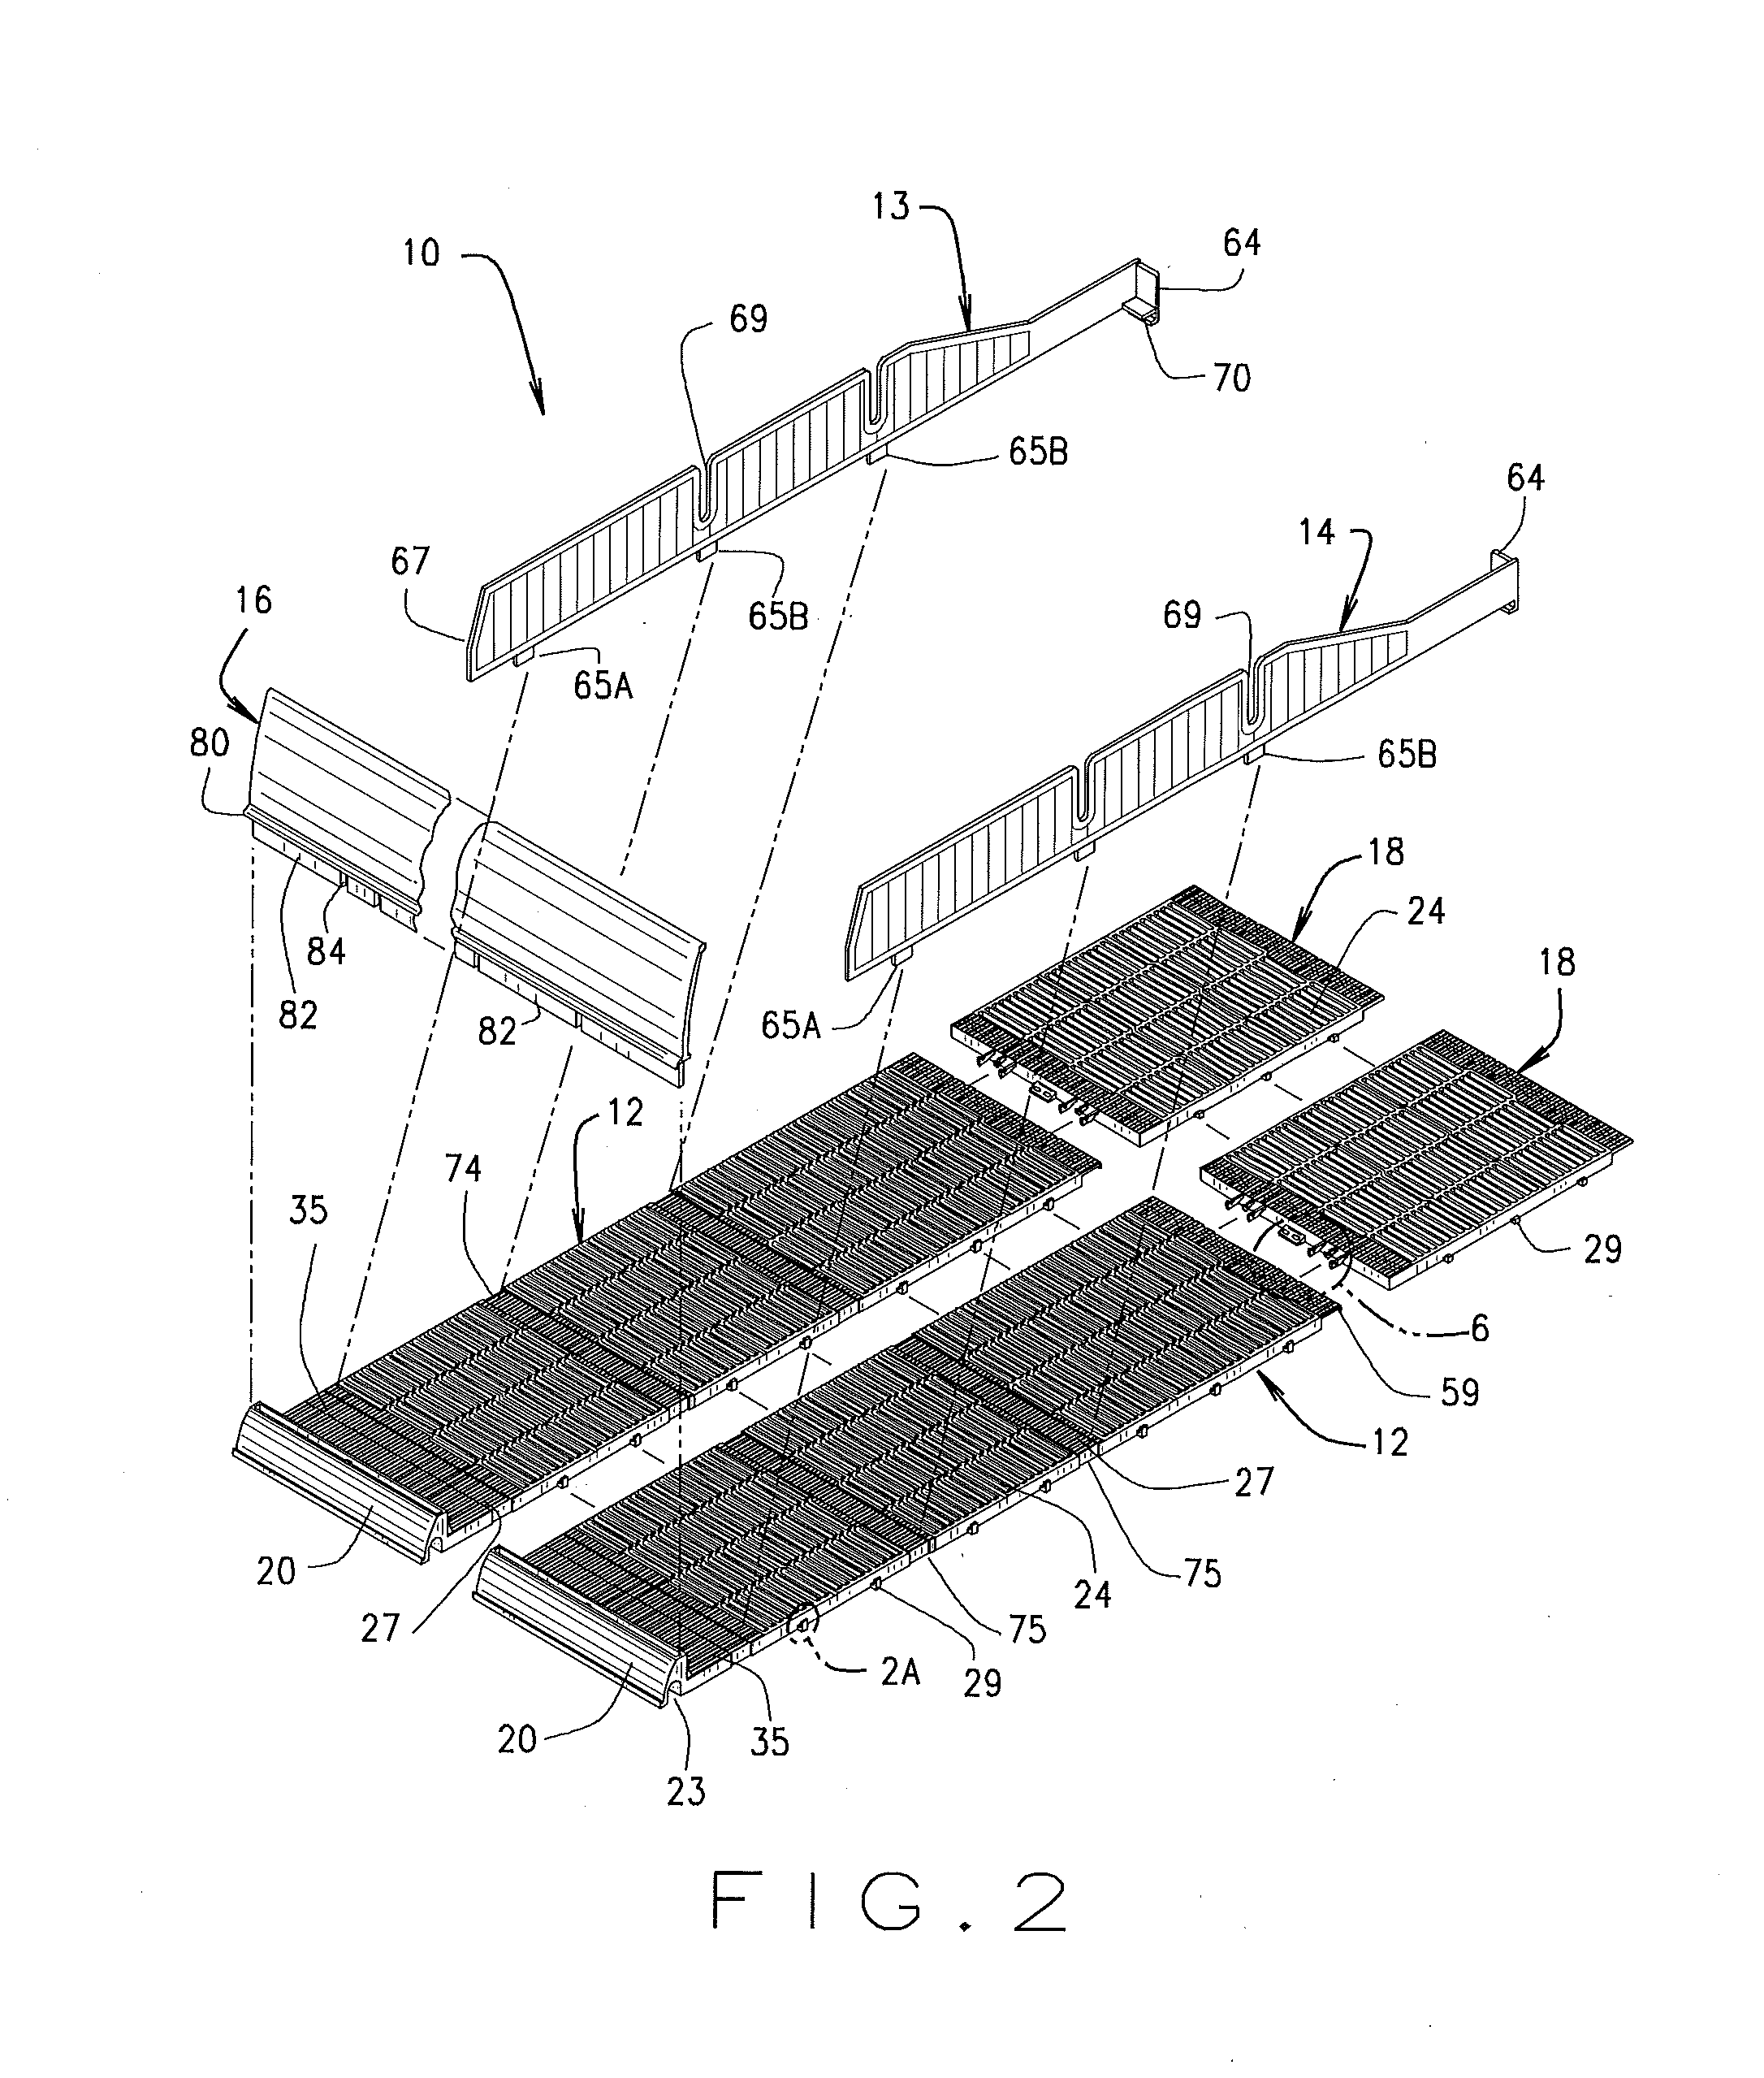 Product merchandising system